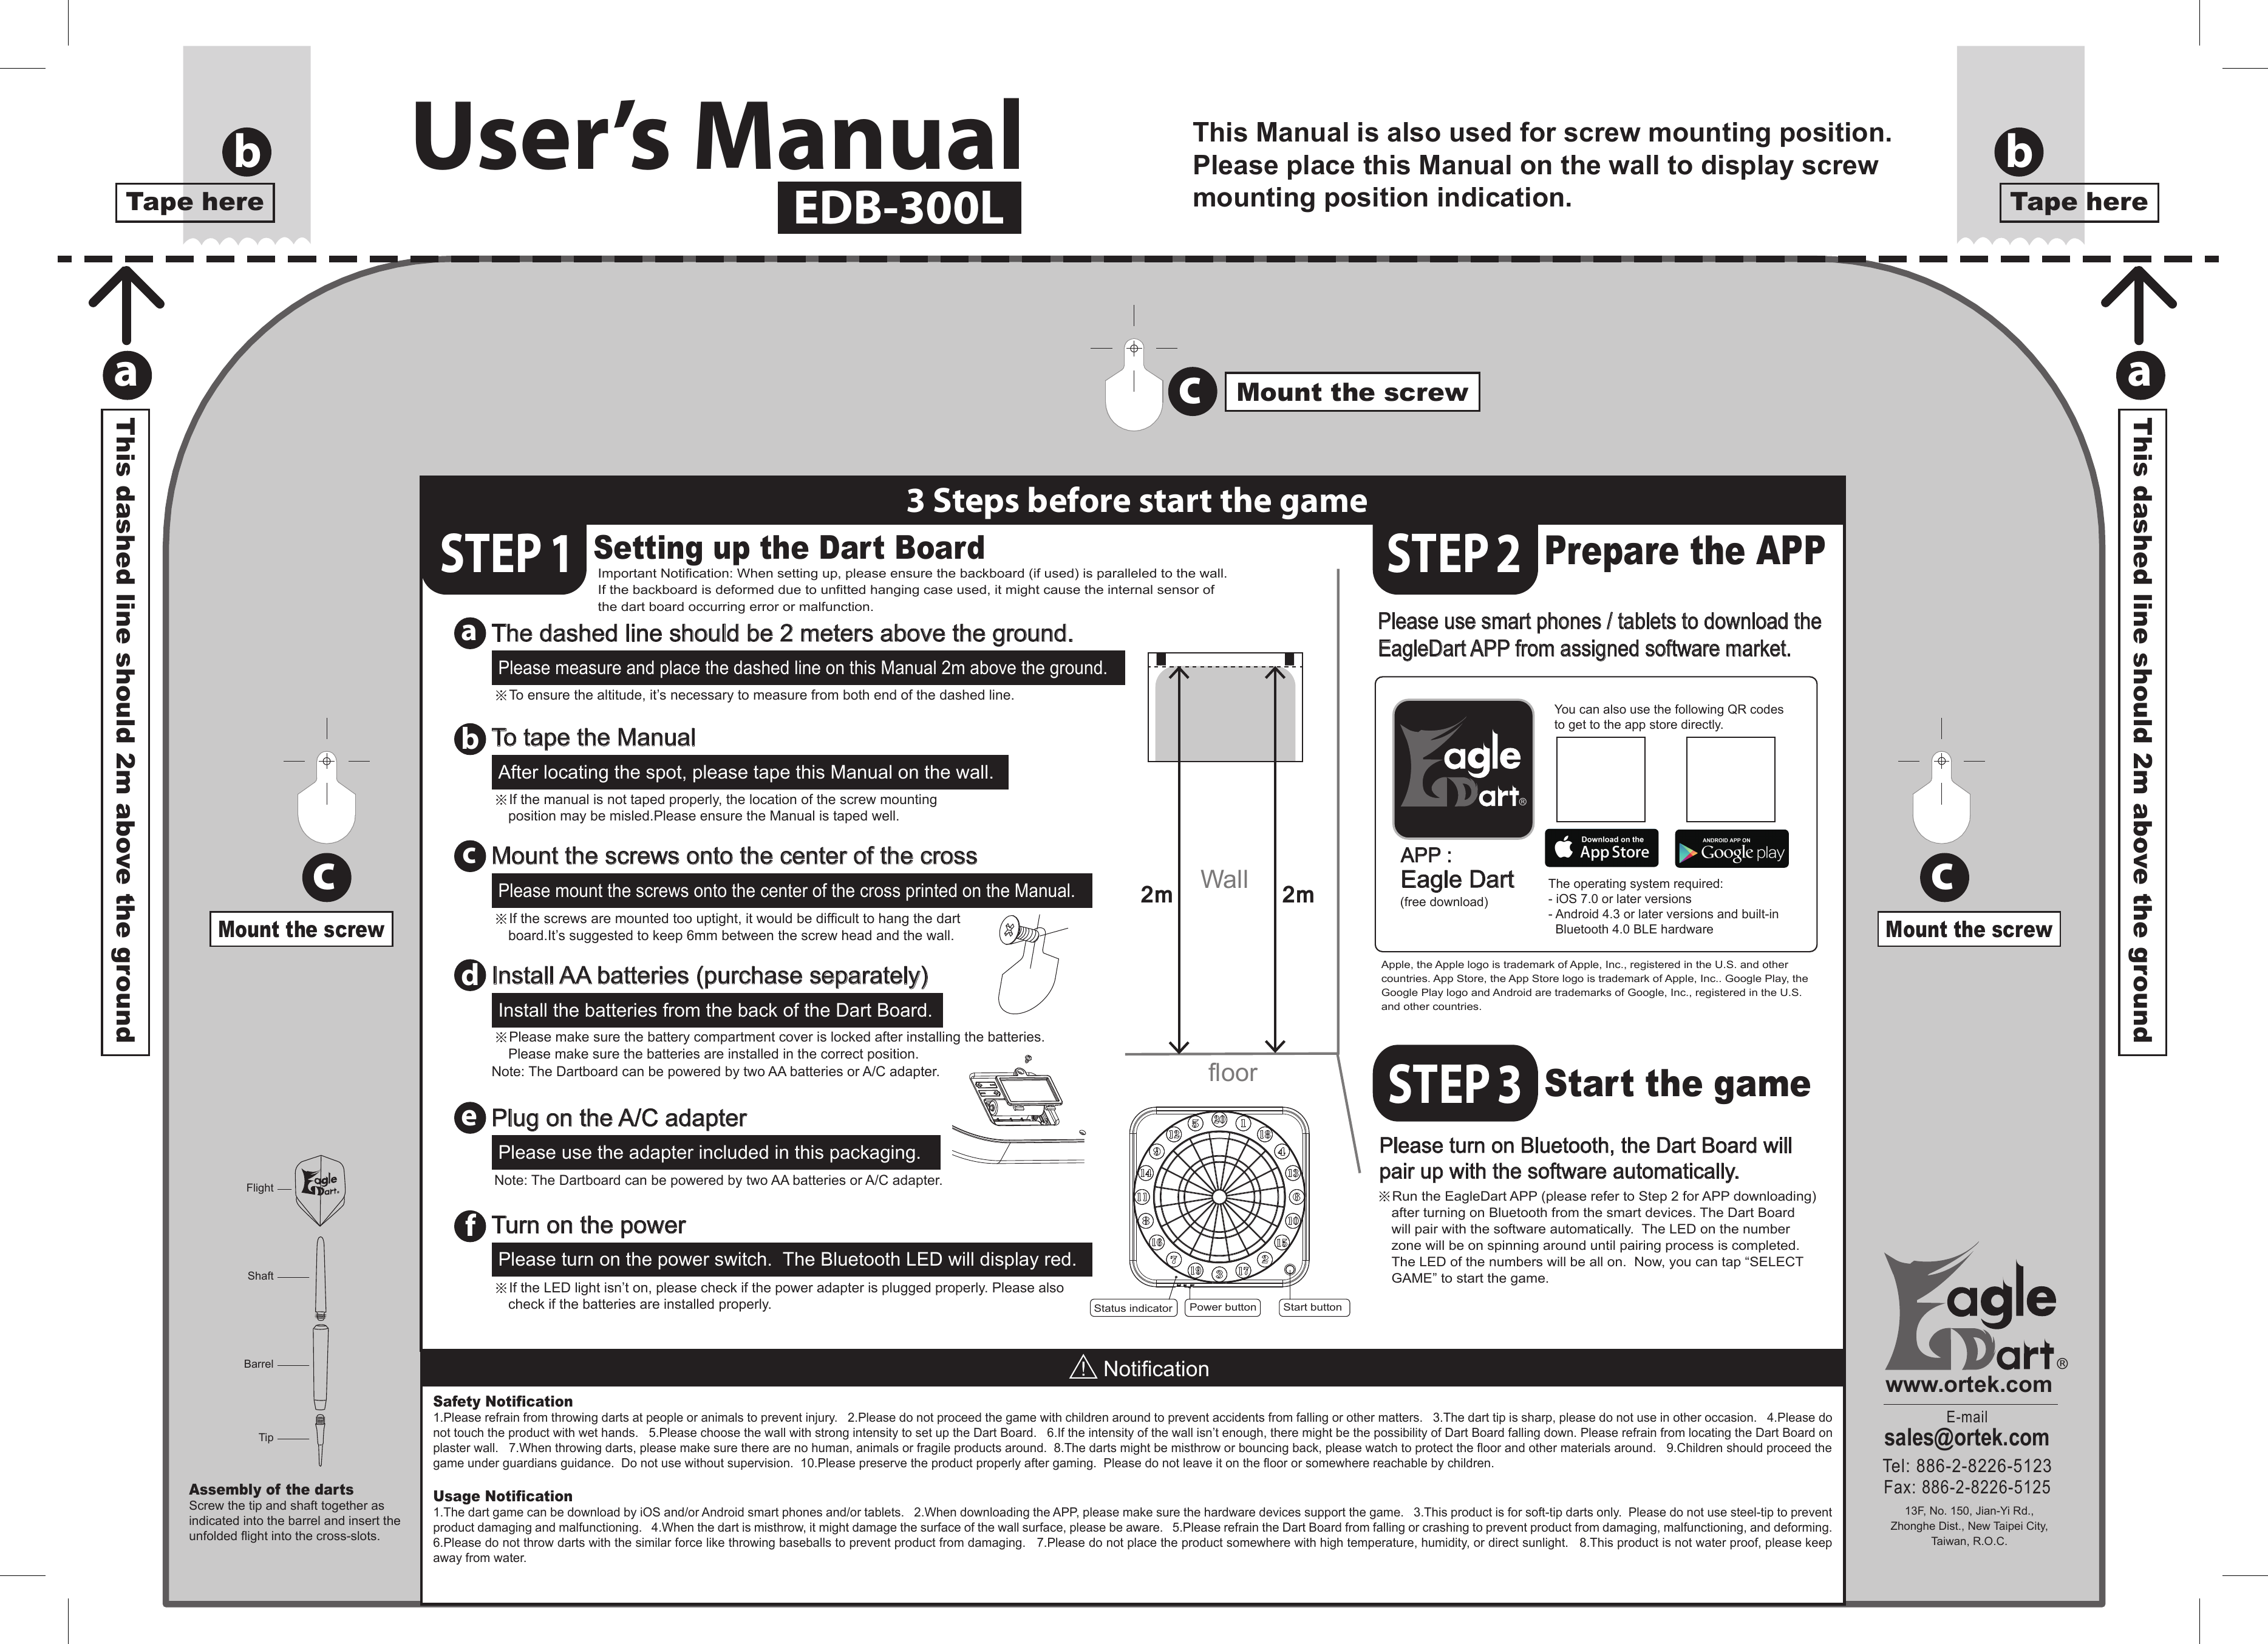 This Manual is also used for screw mounting position.Please place this Manual on the wall to display screwmounting position indication.The operating system required:- iOS 7.0 or later versions- Android 4.3 or later versions and built-in    Bluetooth 4.0 BLE hardwareYou can also use the following QR codes to get to the app store directly.a3 Steps before start the gameSTEP 1Prepare the APPStart the gamebdefcSafety Notification1.Please refrain from throwing darts at people or animals to prevent injury.   2.Please do not proceed the game with children around to prevent accidents from falling or other matters.   3.The dart tip is sharp, please do not use in other occasion.   4.Please do not touch the product with wet hands.   5.Please choose the wall with strong intensity to set up the Dart Board.   6.If the intensity of the wall isn’t enough, there might be the possibility of Dart Board falling down. Please refrain from locating the Dart Board on plaster wall.   7.When throwing darts, please make sure there are no human, animals or fragile products around.  8.The darts might be misthrow or bouncing back, please watch to protect the floor and other materials around.   9.Children should proceed the game under guardians guidance.  Do not use without supervision.  10.Please preserve the product properly after gaming.  Please do not leave it on the floor or somewhere reachable by children.Usage Notification1.The dart game can be download by iOS and/or Android smart phones and/or tablets.   2.When downloading the APP, please make sure the hardware devices support the game.   3.This product is for soft-tip darts only.  Please do not use steel-tip to prevent product damaging and malfunctioning.   4.When the dart is misthrow, it might damage the surface of the wall surface, please be aware.   5.Please refrain the Dart Board from falling or crashing to prevent product from damaging, malfunctioning, and deforming.   6.Please do not throw darts with the similar force like throwing baseballs to prevent product from damaging.   7.Please do not place the product somewhere with high temperature, humidity, or direct sunlight.   8.This product is not water proof, please keep away from water.Assembly of the dartsScrew the tip and shaft together as indicated into the barrel and insert the unfolded flight into the cross-slots.®E-mailsales@ortek.comTel: 886-2-8226-5123Fax: 886-2-8226-5125®www.ortek.com13F, No. 150, Jian-Yi Rd.,Zhonghe Dist., New Taipei City,Taiwan, R.O.C.APP :Eagle Dart (free download)abccThis dashed line should 2m above the groundaThis dashed line should 2m above the groundTape herebTape hereMount the screwMount the screwcMount the screwSetting up the Dart BoardImportant Notification: When setting up, please ensure the backboard (if used) is paralleled to the wall.  If the backboard is deformed due to unfitted hanging case used, it might cause the internal sensor of the dart board occurring error or malfunction.The dashed line should be 2 meters above the ground.Please measure and place the dashed line on this Manual 2m above the ground.Mount the screws onto the center of the crossPlease mount the screws onto the center of the cross printed on the Manual.Install AA batteries (purchase separately)Please turn on Bluetooth, the Dart Board willpair up with the software automatically.Install the batteries from the back of the Dart Board.To tape the ManualAfter locating the spot, please tape this Manual on the wall.※Please make sure the battery compartment cover is locked after installing the batteries.  Please make sure the batteries are installed in the correct position.※Run the EagleDart APP (please refer to Step 2 for APP downloading) after turning on Bluetooth from the smart devices. The Dart Board will pair with the software automatically.  The LED on the number zone will be on spinning around until pairing process is completed.  The LED of the numbers will be all on.  Now, you can tap “SELECT GAME” to start the game.Apple, the Apple logo is trademark of Apple, Inc., registered in the U.S. and other countries. App Store, the App Store logo is trademark of Apple, Inc.. Google Play, the Google Play logo and Android are trademarks of Google, Inc., registered in the U.S. and other countries.Plug on the A/C adapterPlease use the adapter included in this packaging.Note: The Dartboard can be powered by two AA batteries or A/C adapter.Turn on the powerPlease turn on the power switch.  The Bluetooth LED will display red.※If the LED light isn’t on, please check if the power adapter is plugged properly. Please also check if the batteries are installed properly.※If the screws are mounted too uptight, it would be difficult to hang the dart board.It’s suggested to keep 6mm between the screw head and the wall.※If the manual is not taped properly, the location of the screw mounting position may be misled.Please ensure the Manual is taped well.※To ensure the altitude, it’s necessary to measure from both end of the dashed line.Please use smart phones / tablets to download the EagleDart APP from assigned software market.2m 2mWallfloorStart buttonPower buttonStatus indicatorNotificationTipBarrelShaftFlightUser’s ManualEDB-300LSTEP 2STEP 3Note: The Dartboard can be powered by two AA batteries or A/C adapter.